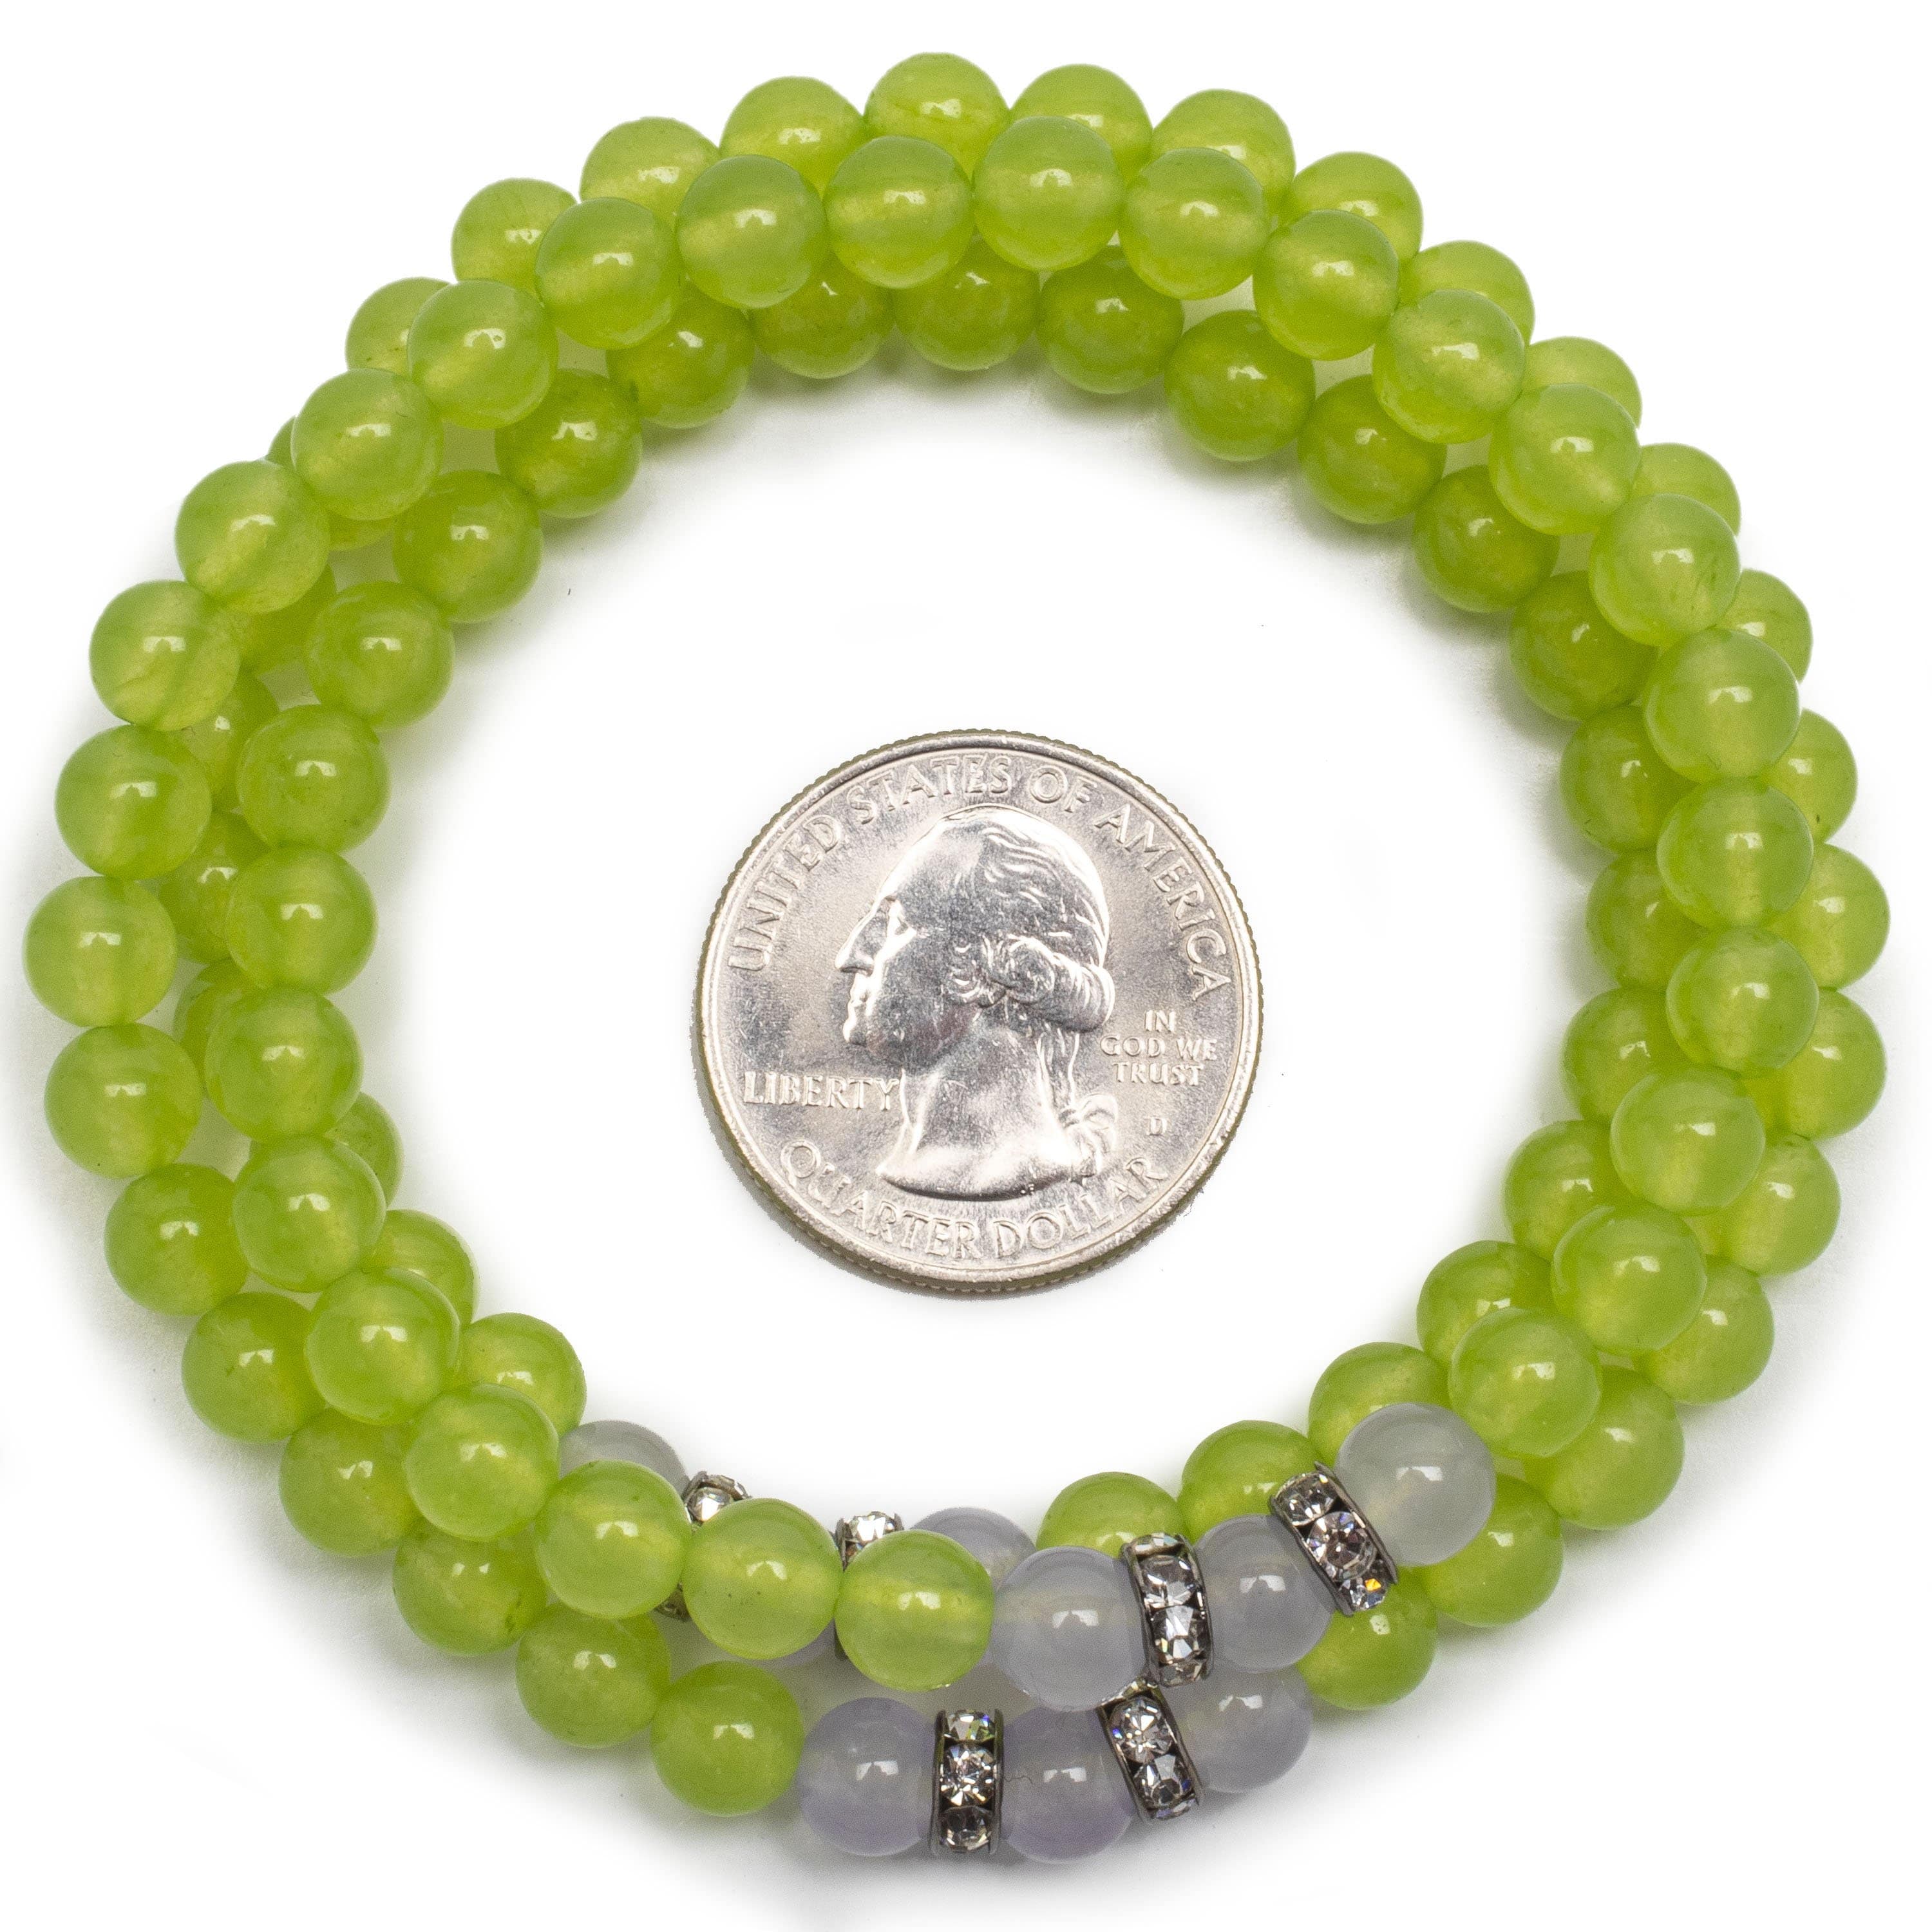 Kalifano Gemstone Bracelets Lime Green Agate 6mm Beads with Lavender Agate and Crystal Accent Beads Triple Wrap Elastic Gemstone Bracelet WHITE-BGI3-047